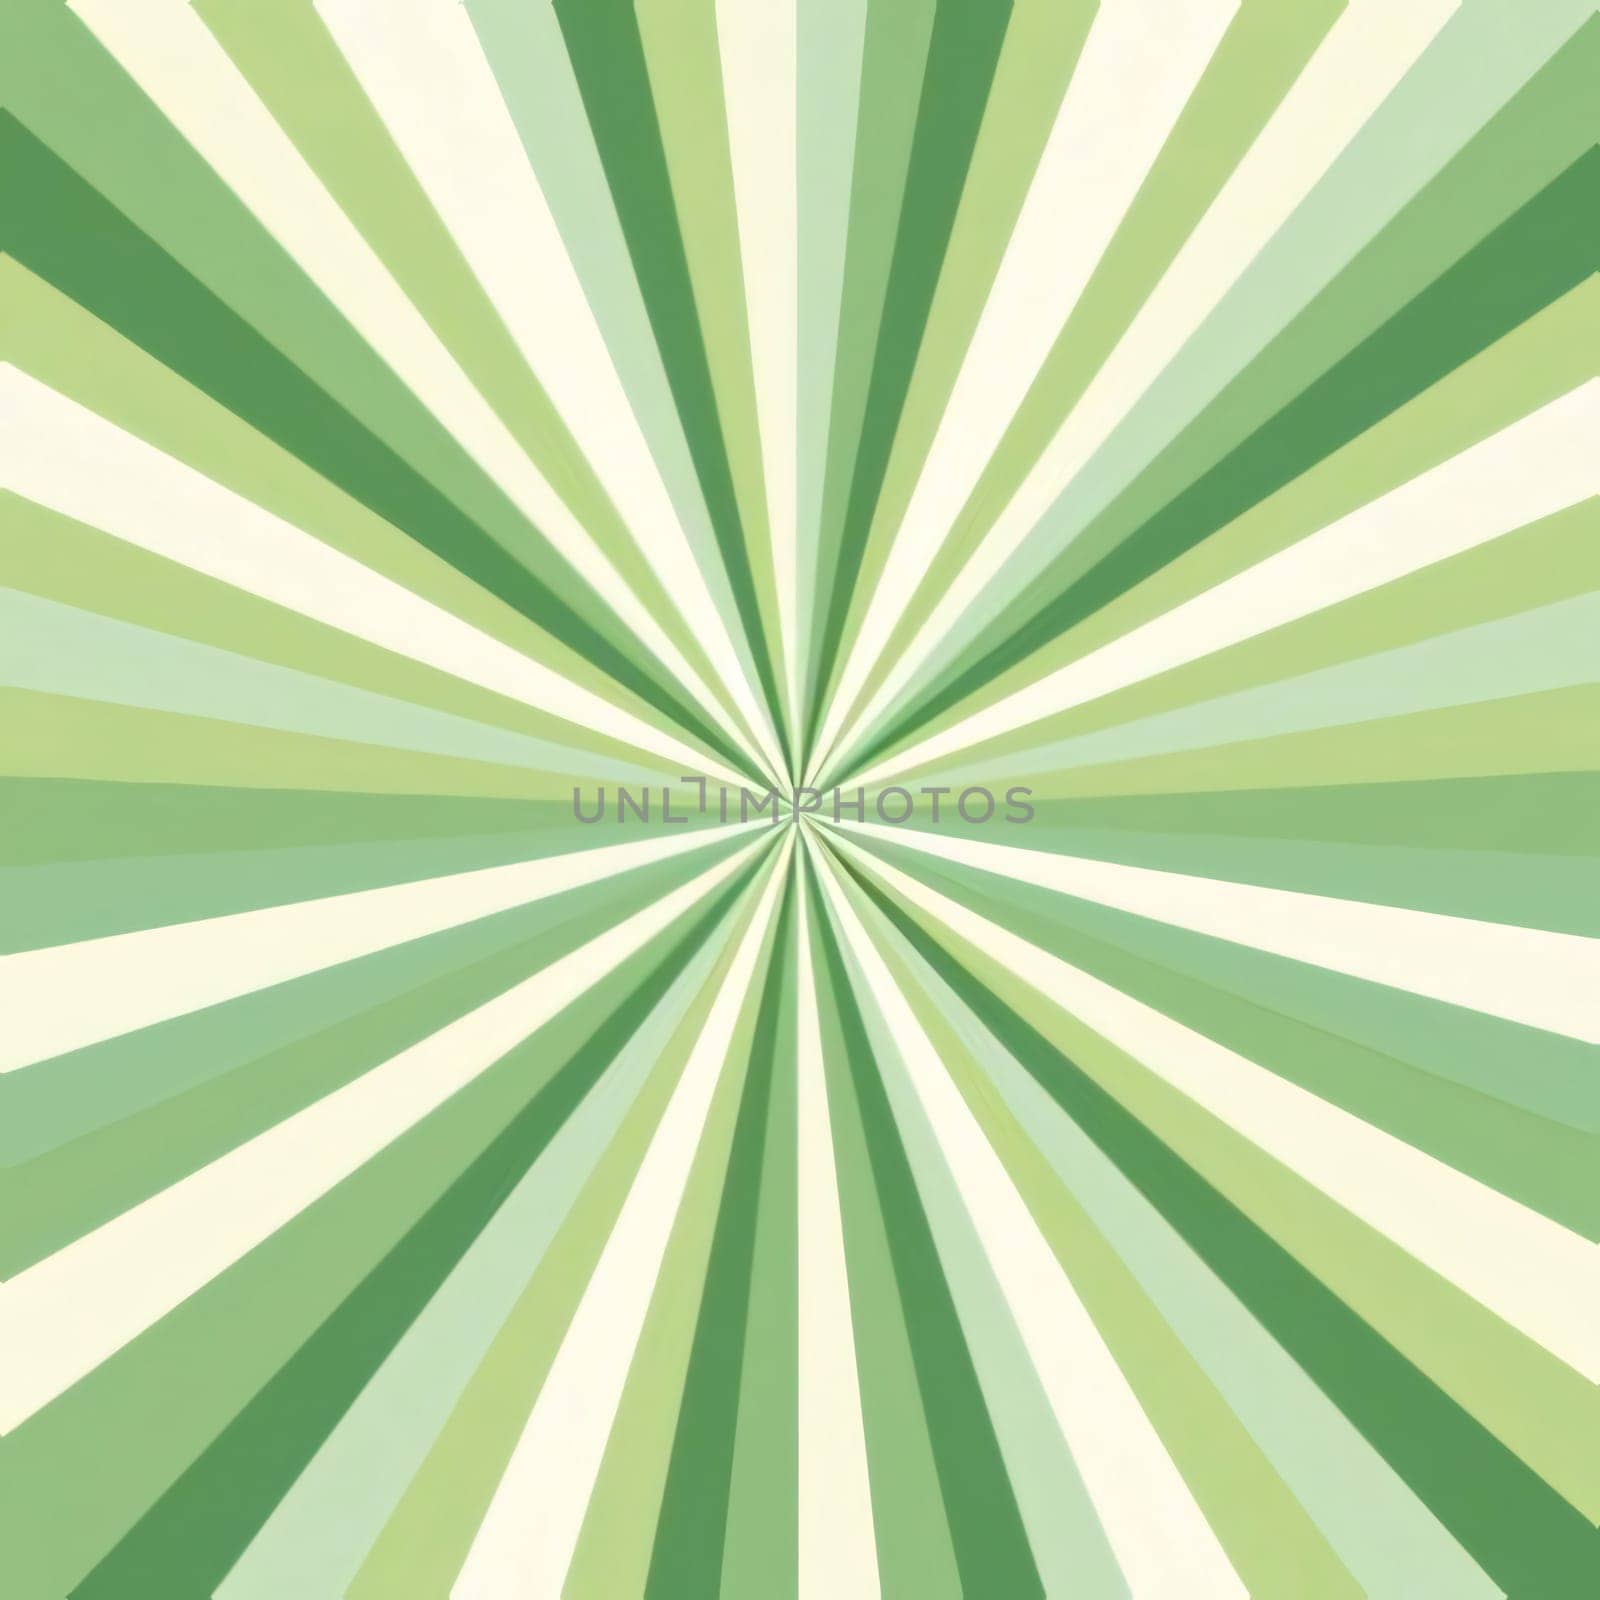 Abstract background design: Green abstract background with rays. Radial pattern. Vector illustration.